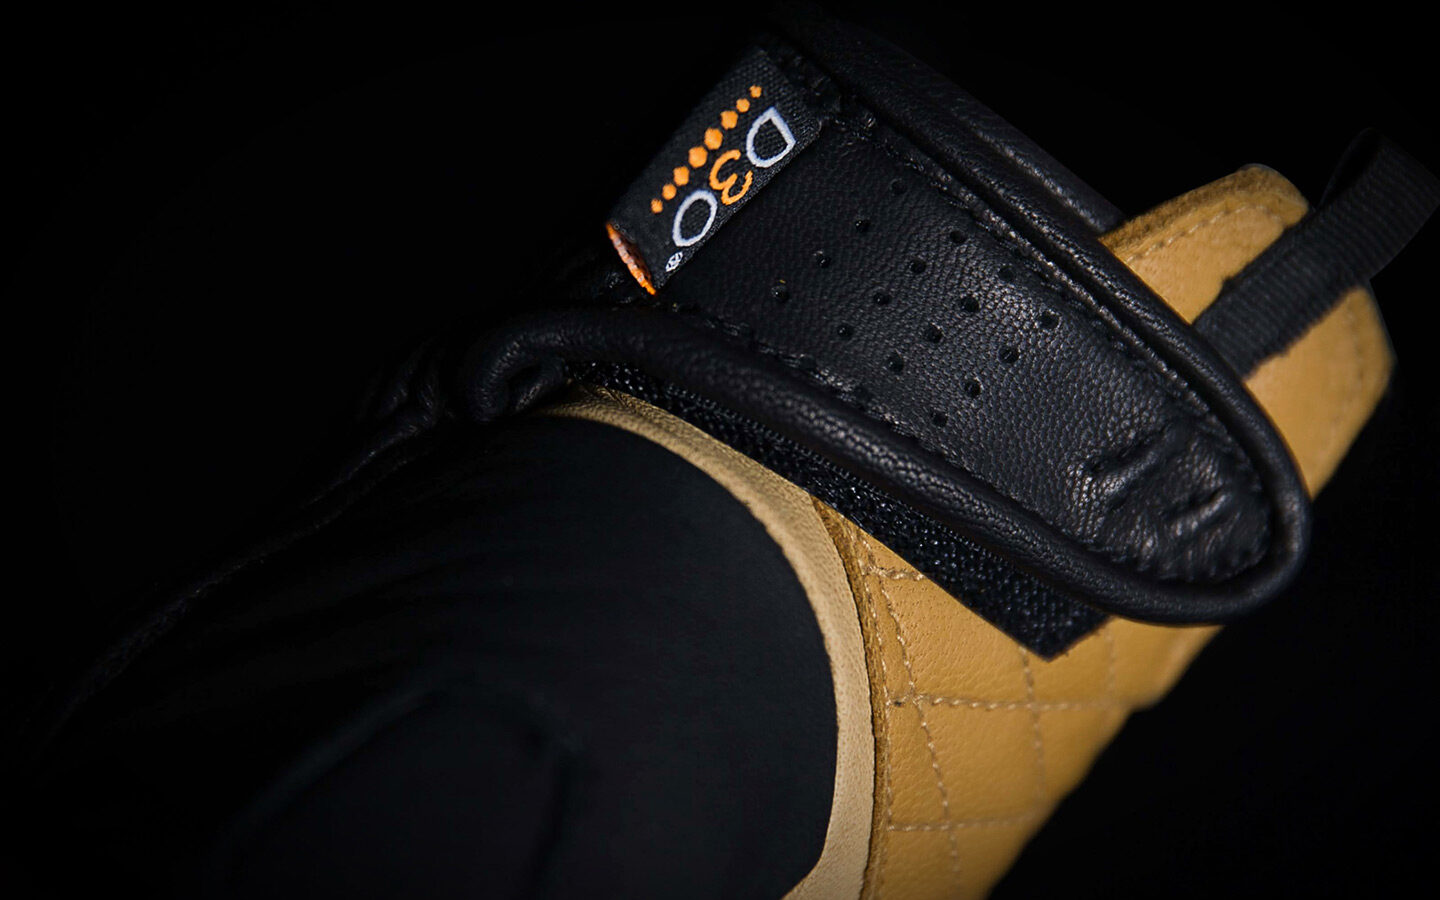 Icon 1000 Axys Gloves detail shot